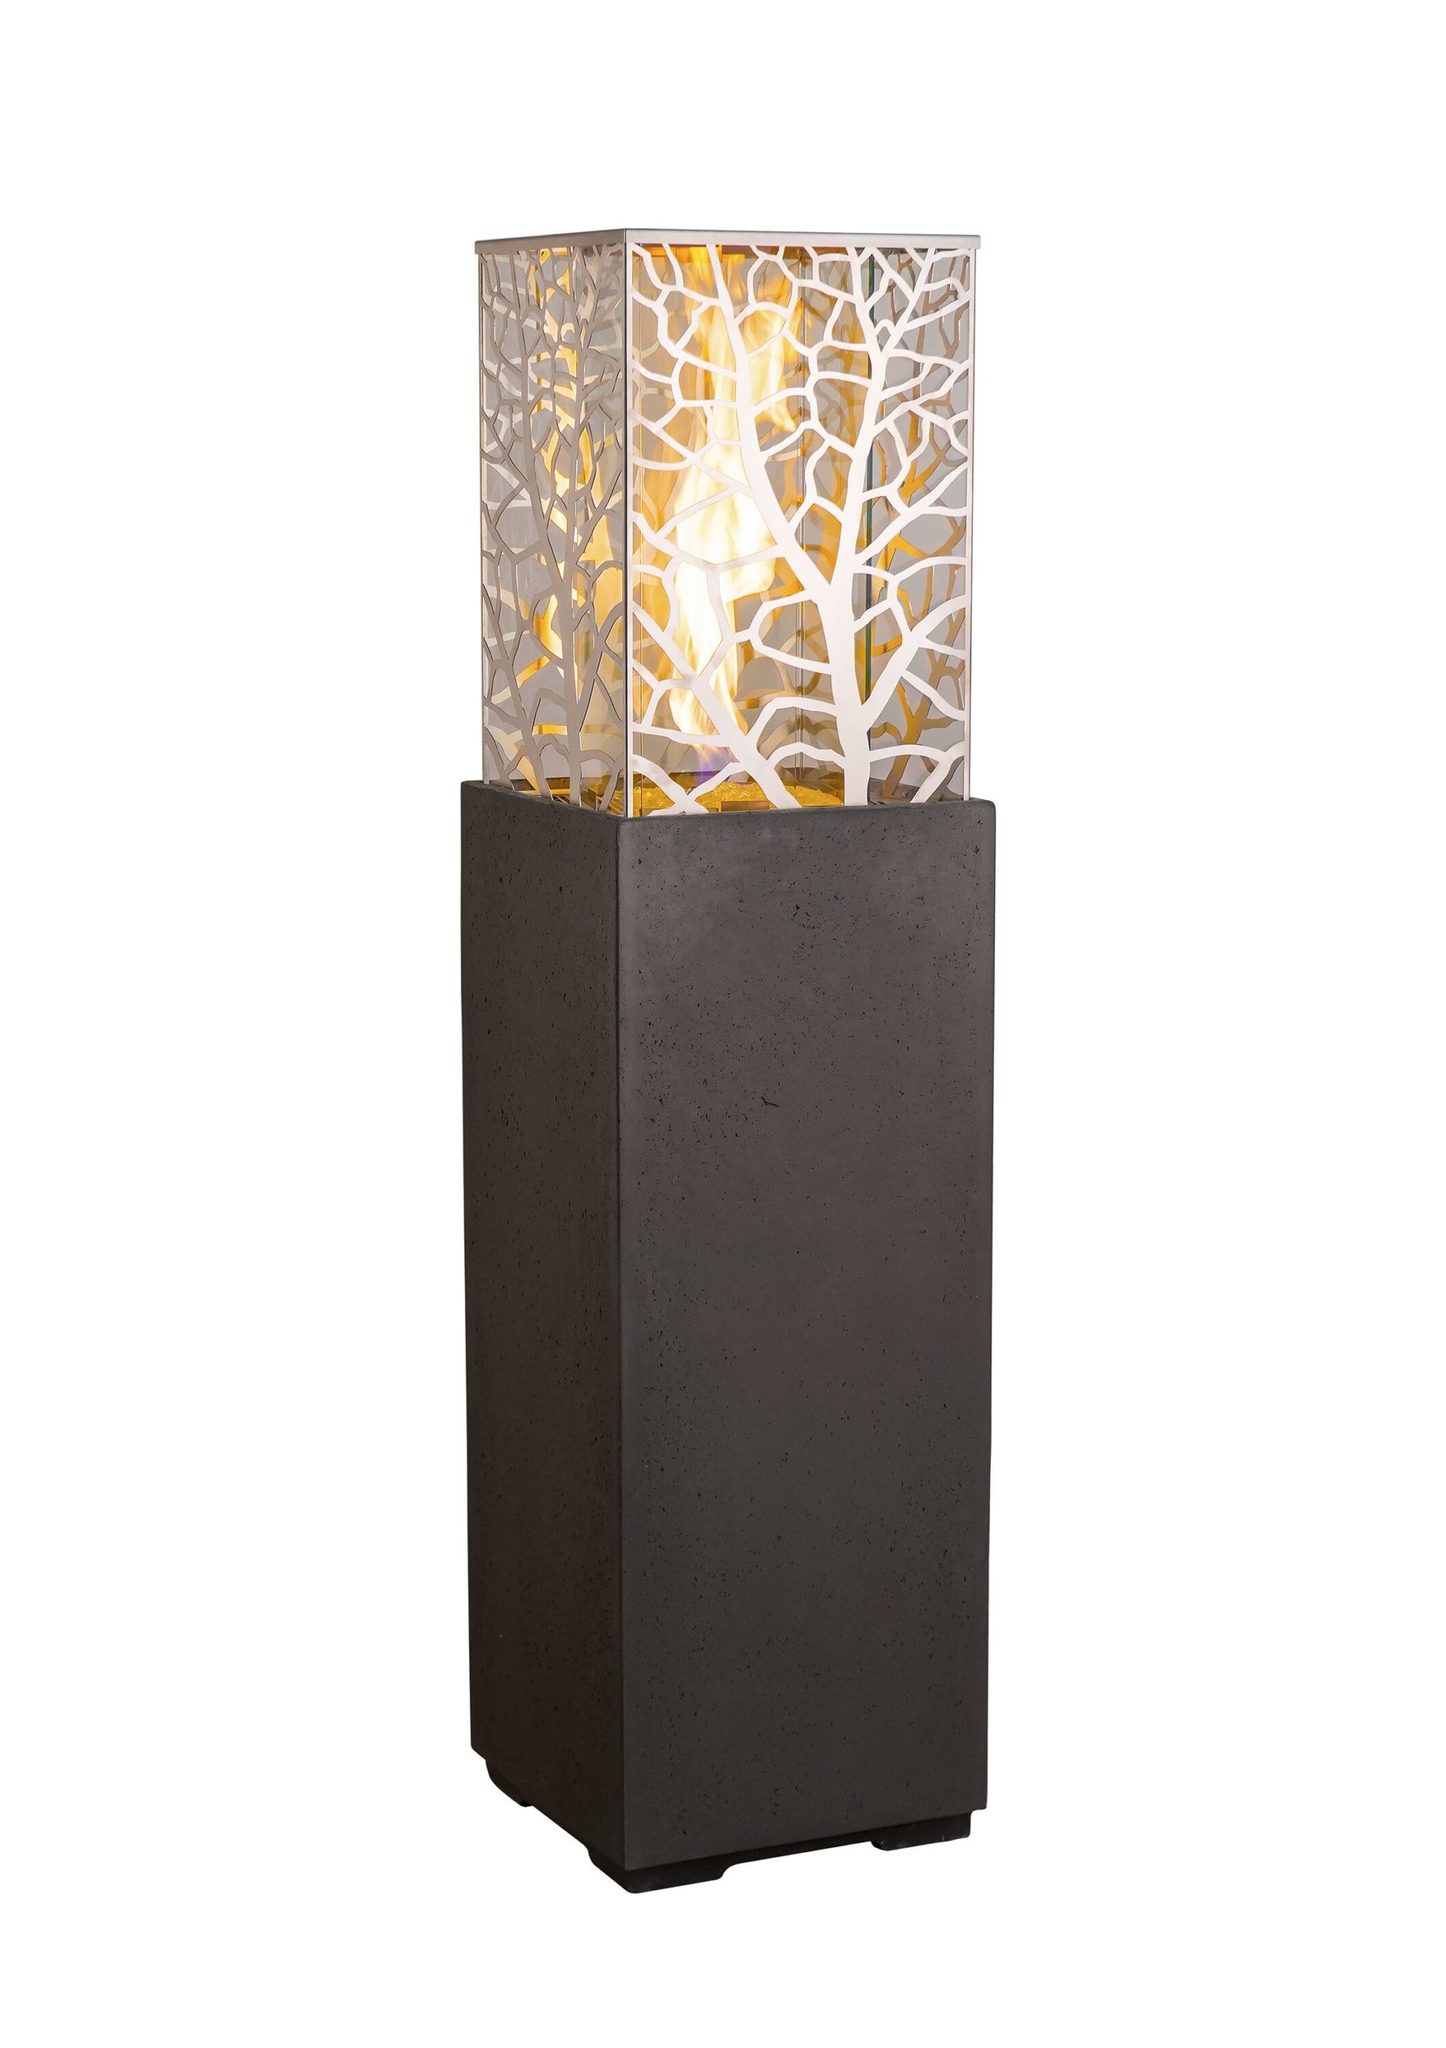 Magnolia fire lantern luxury outdoor living by hausers patio